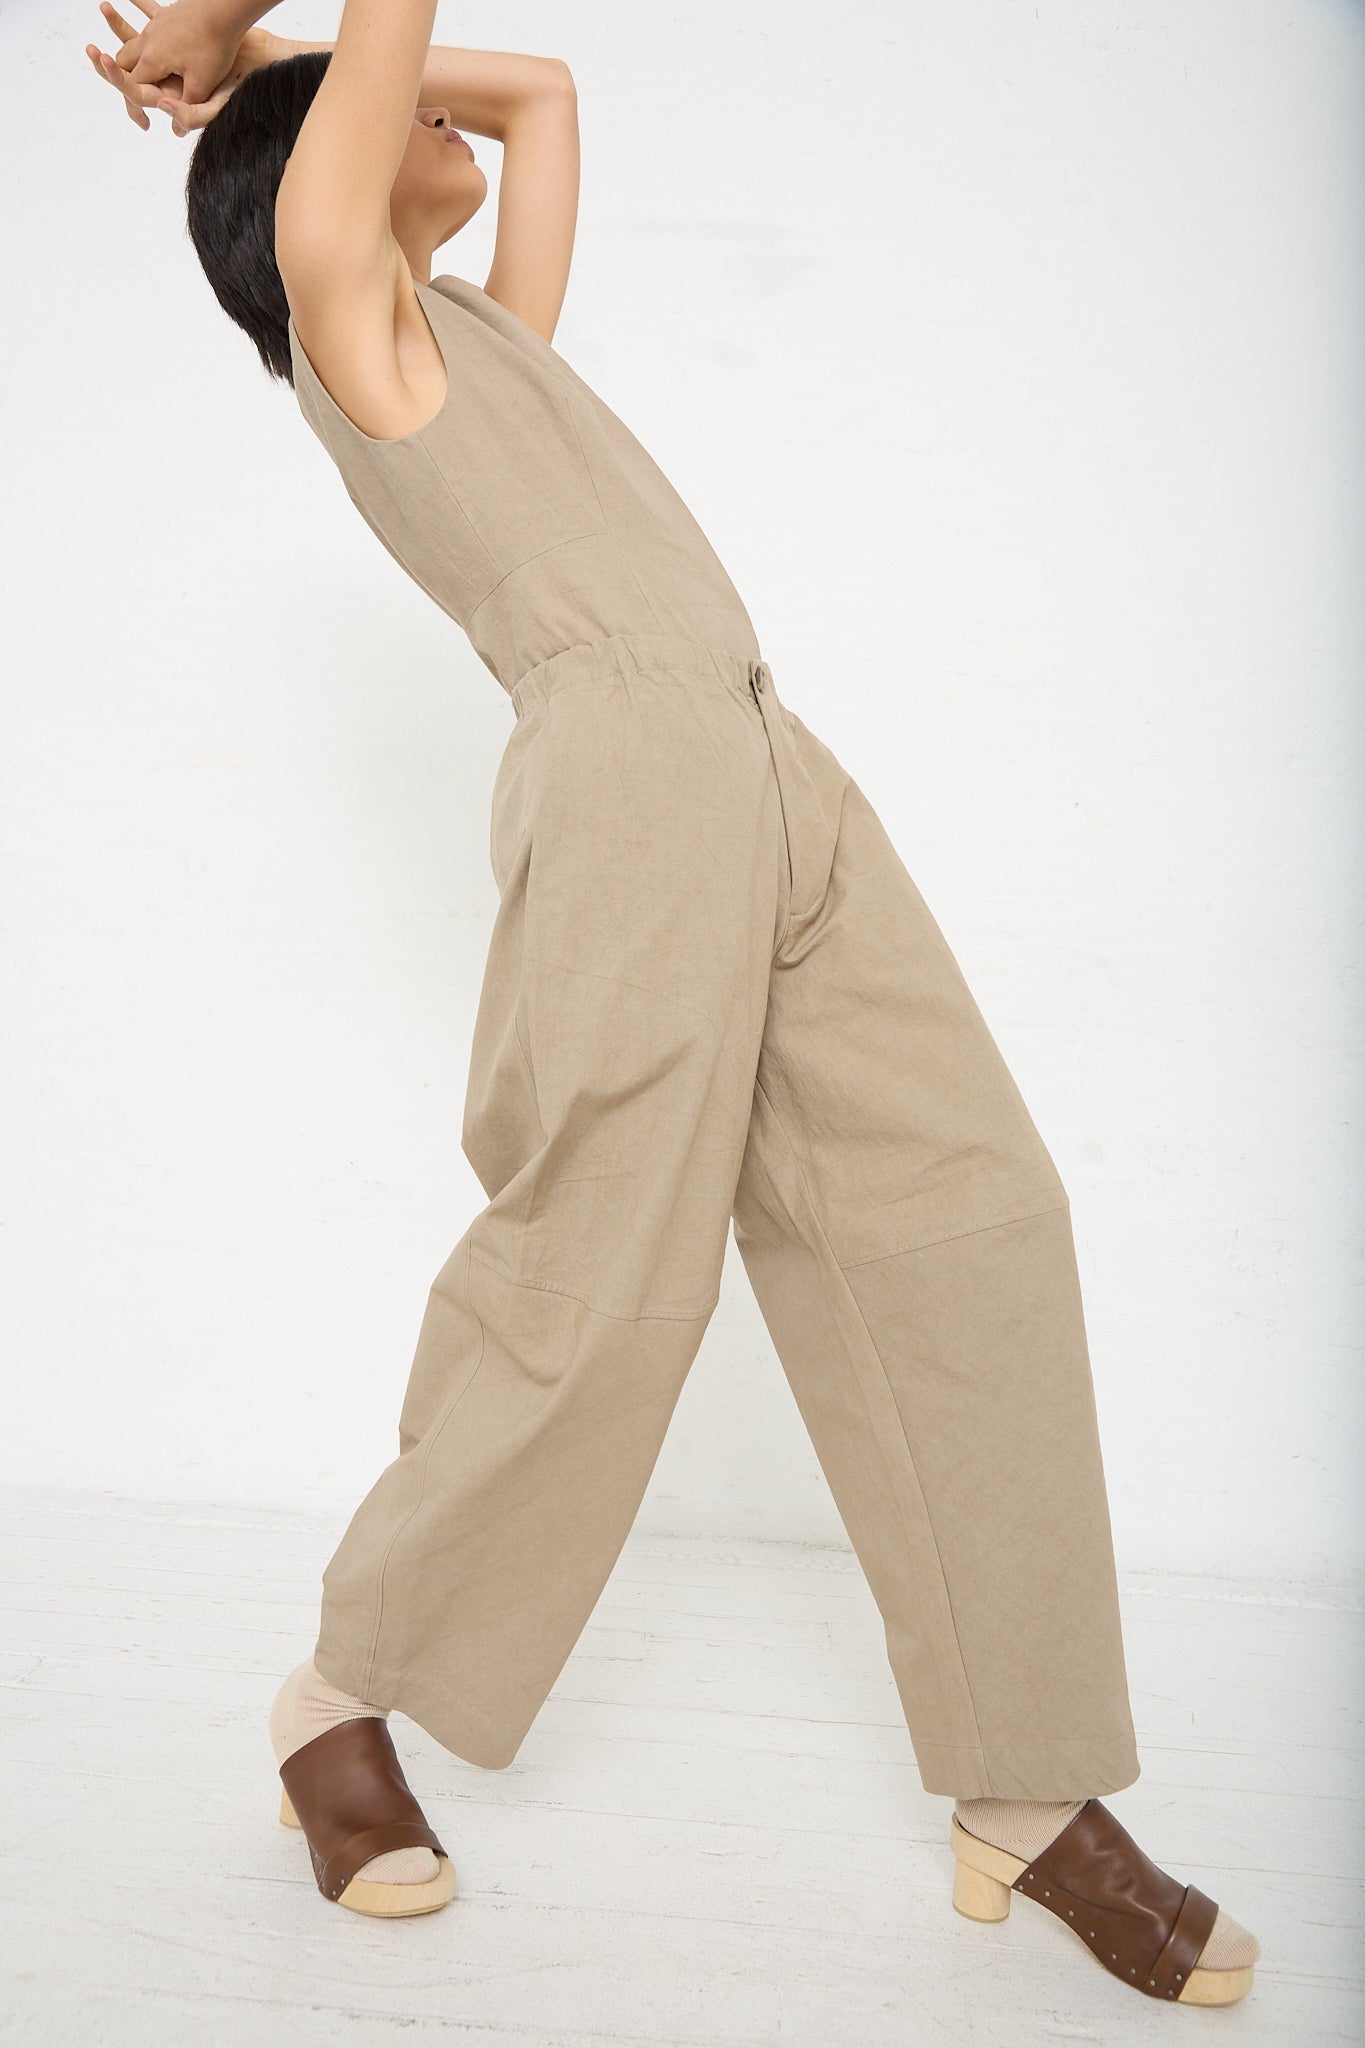 A woman is posing in a New Structure Pant in Drab (Olive Brown) by Lauren Manoogian, which is a relaxed fit cotton pant with an elasticated waist. Full length profile view.